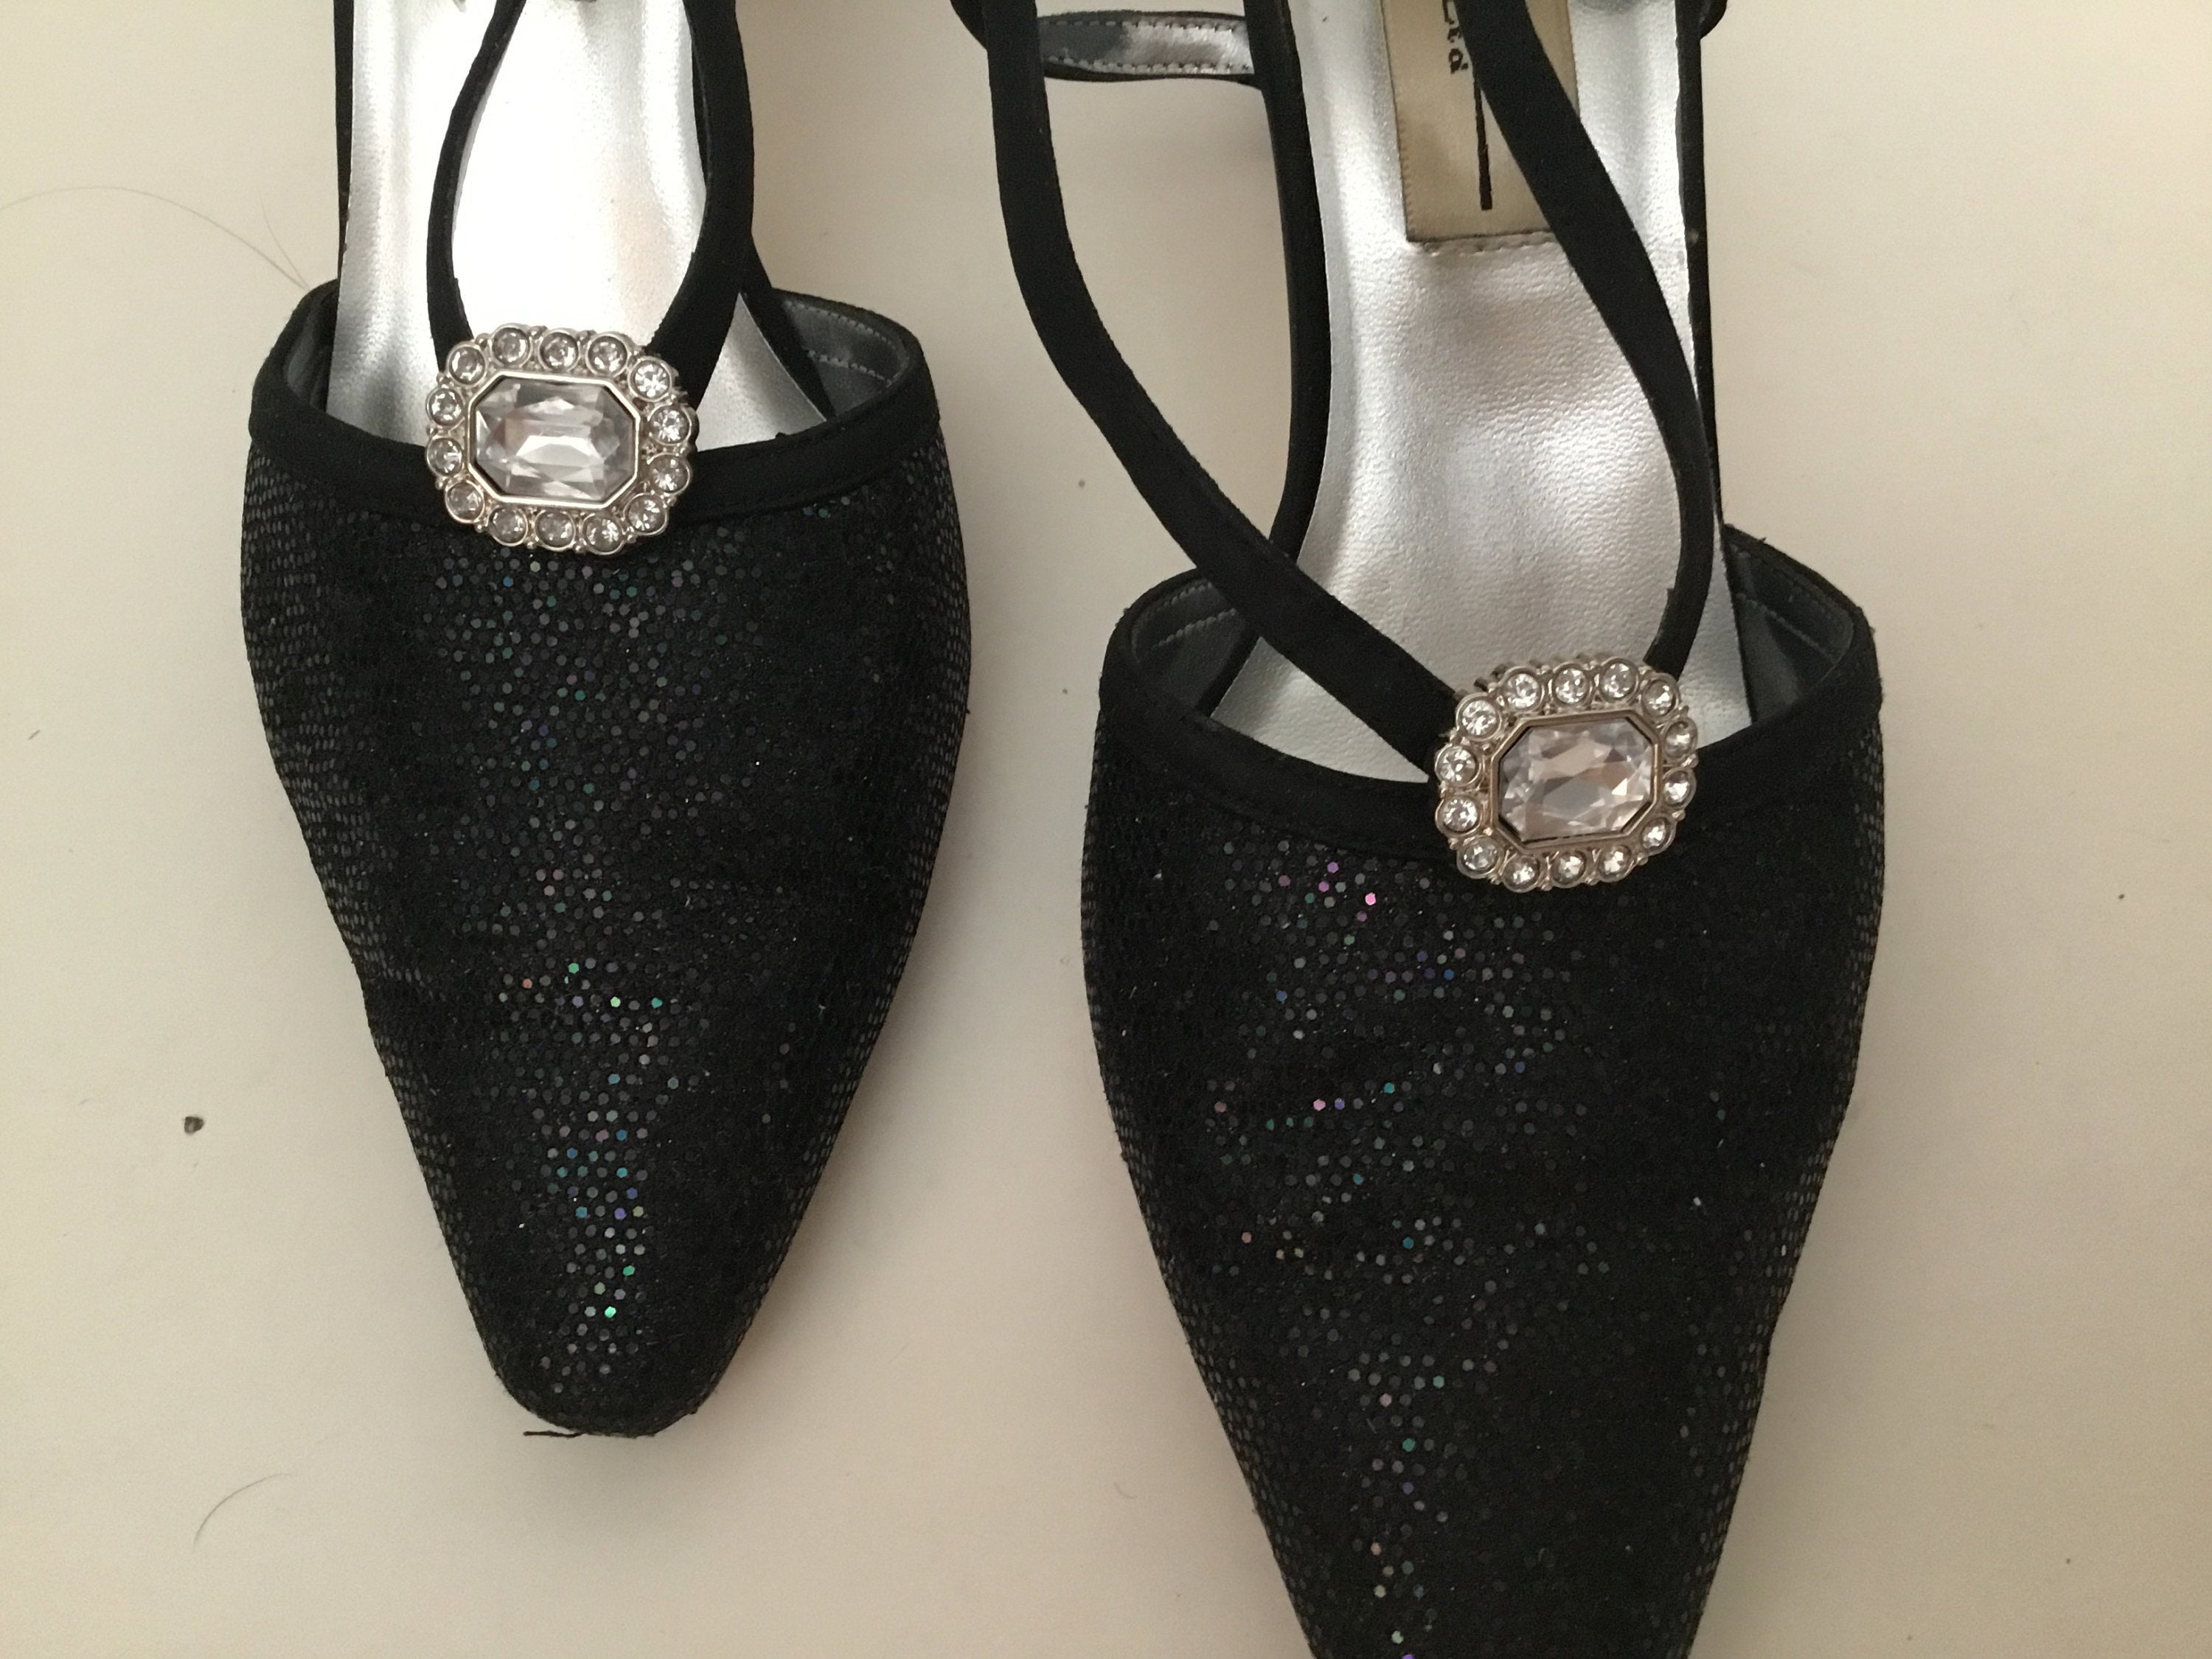 Ruihfas 2Pcs Elegant Bow Shoe Clips Rhinestone Crystal Oval Shoe Buckles  for Women Wedding Party Flats Pumps Shoes Decoration